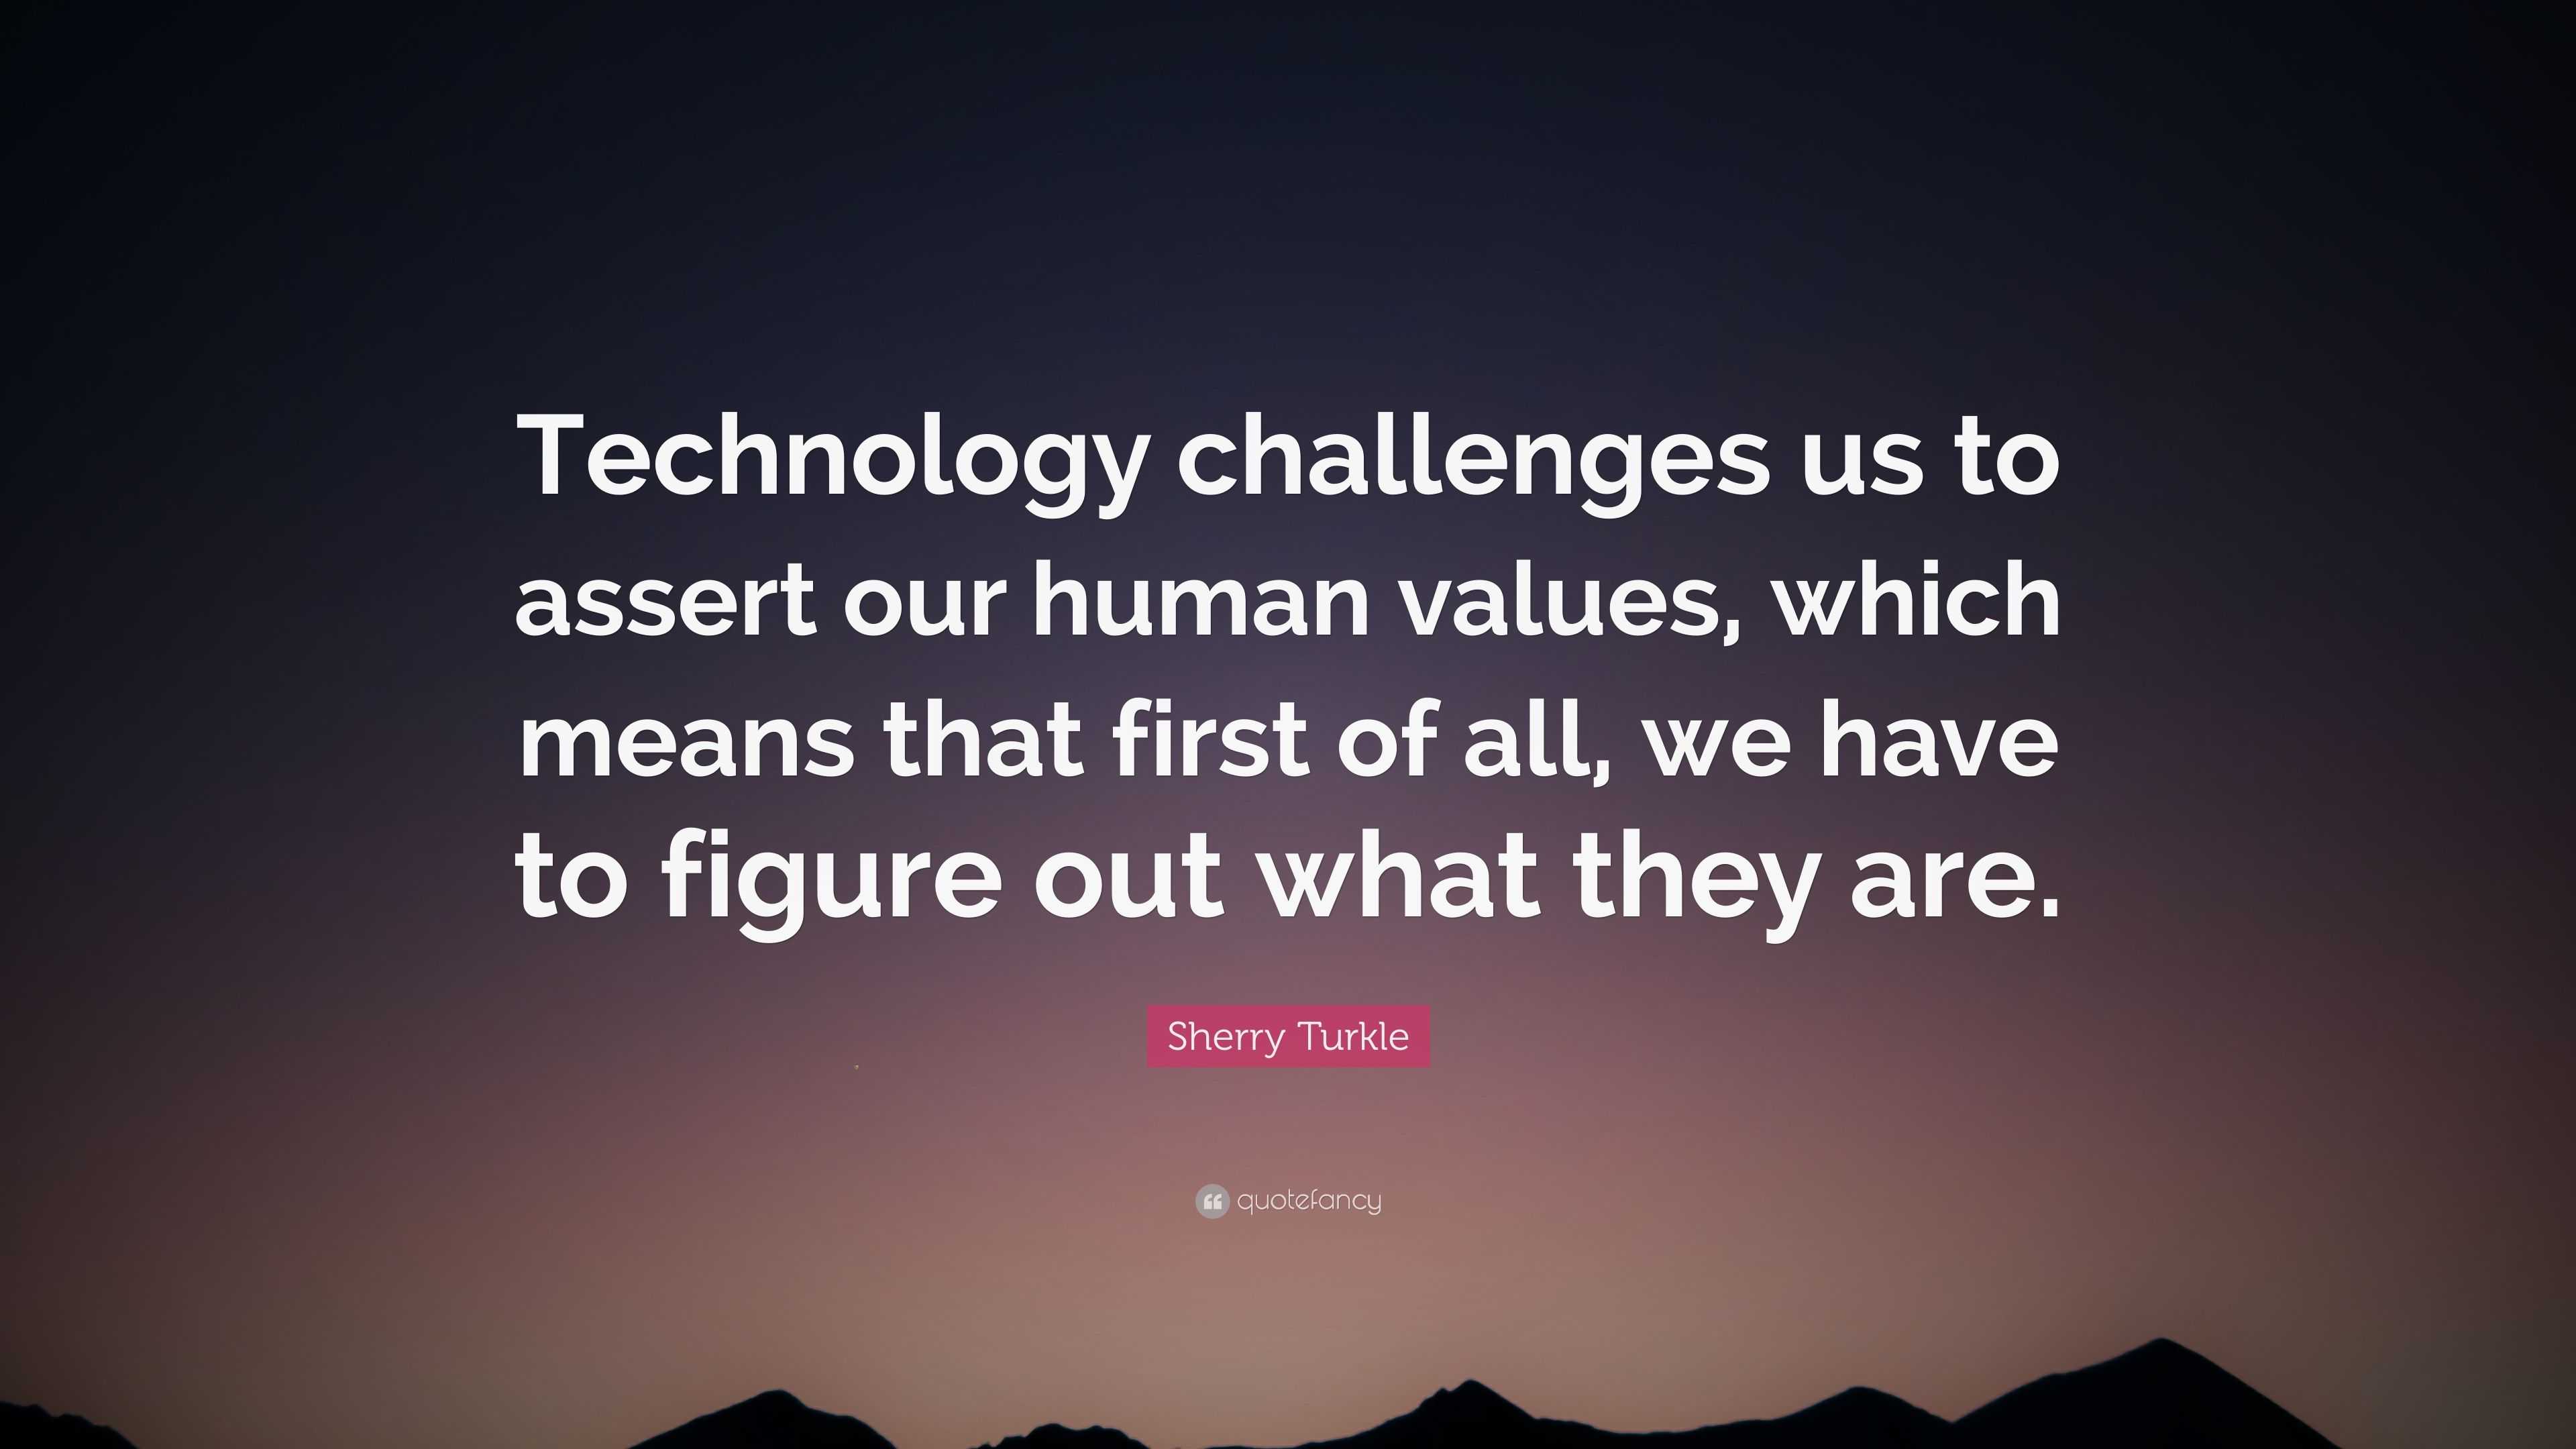 Sherry Turkle Quote: “Technology challenges us to assert our human ...